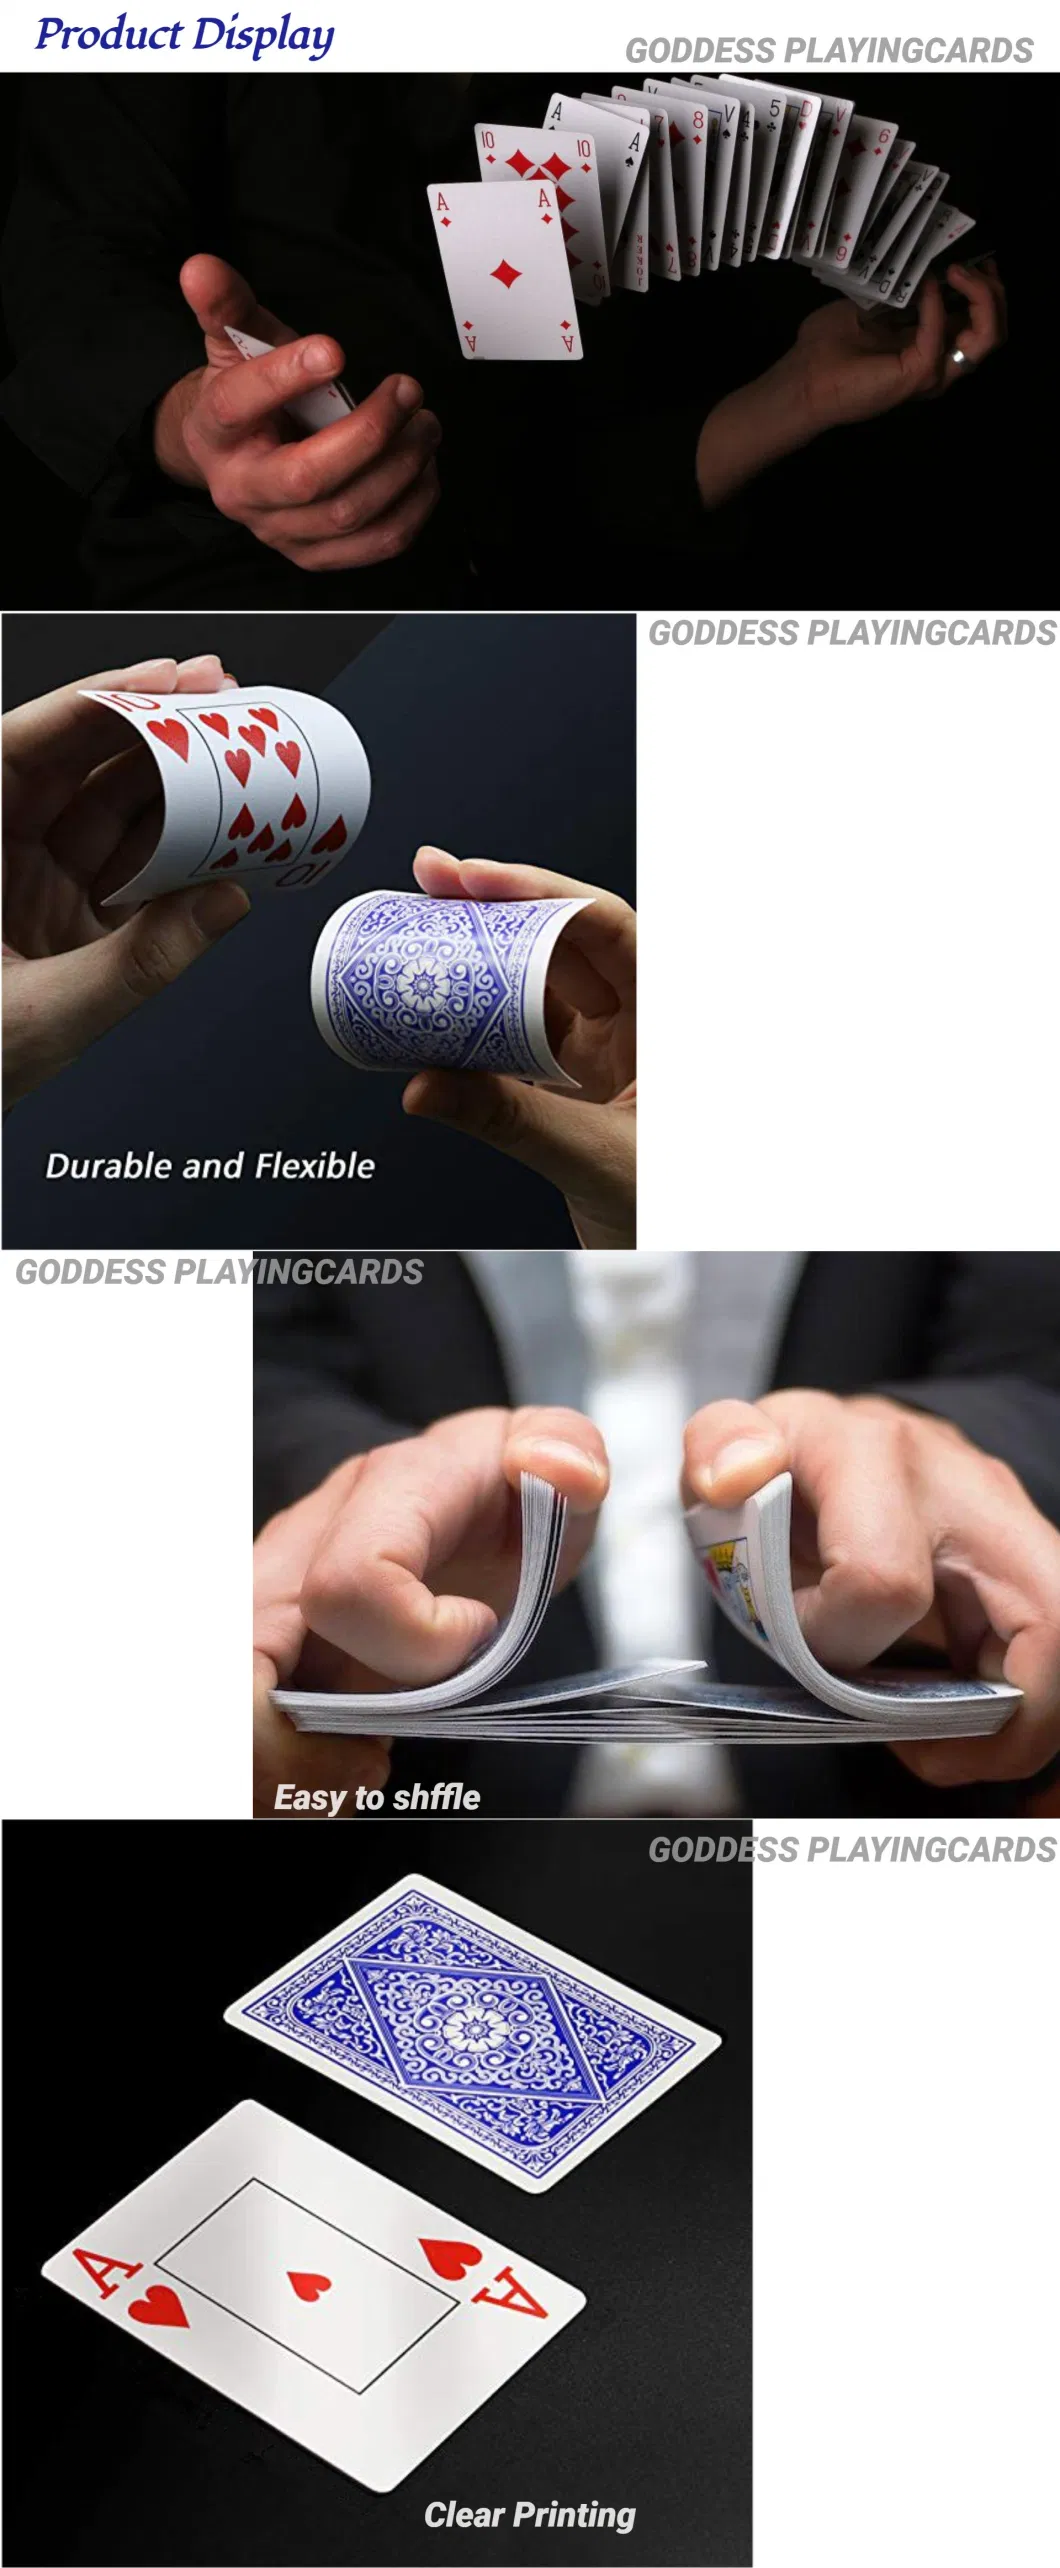 Playing Cards in Travel Pouch